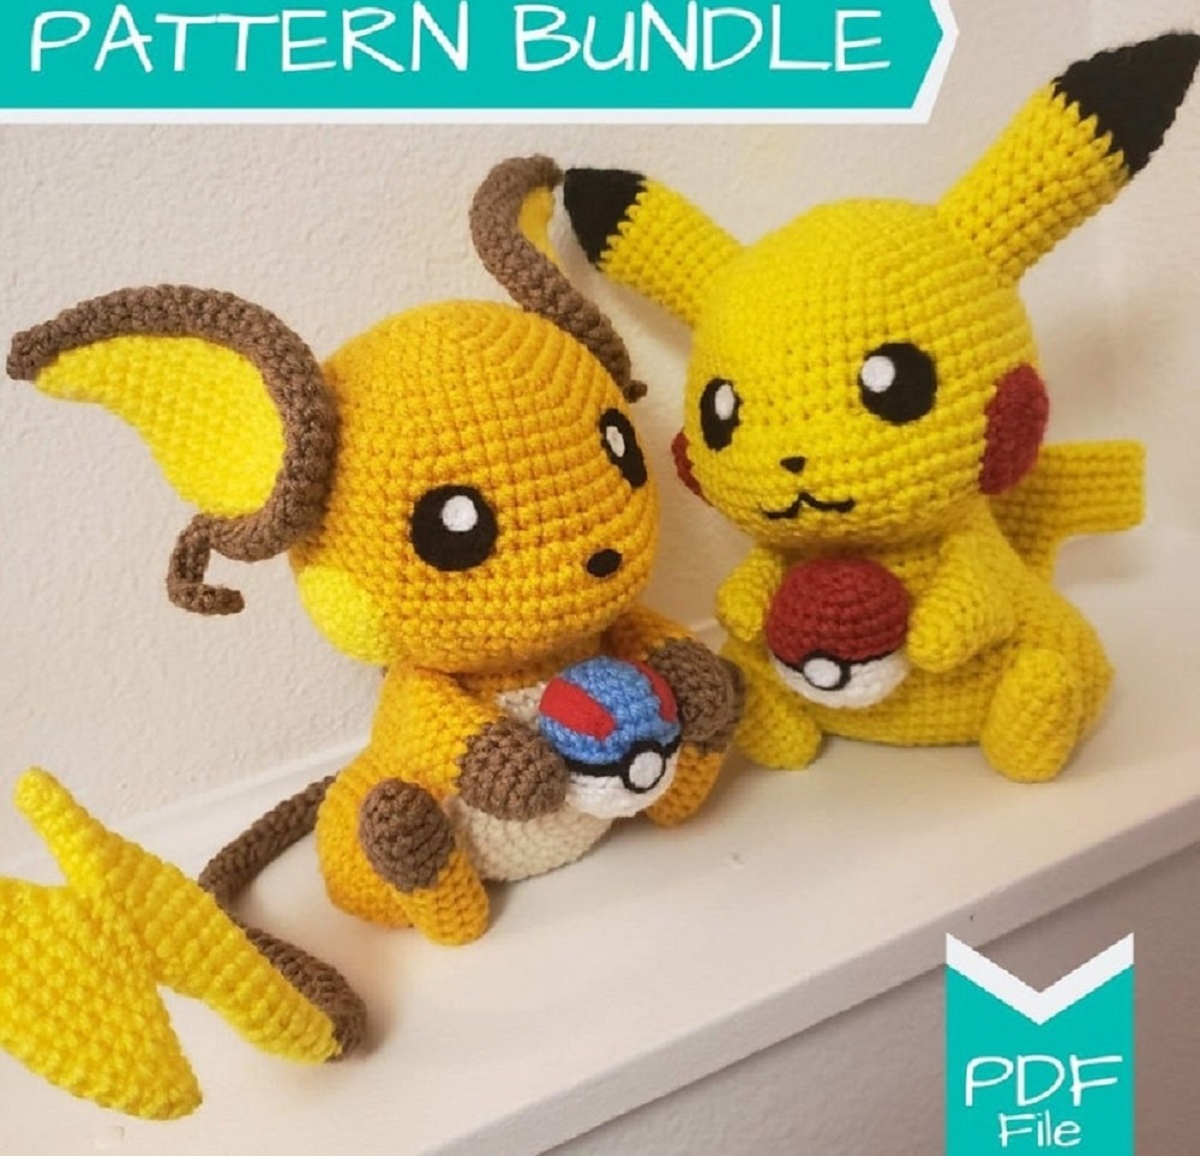 Stuffed crochet Pickachu and Raichu sitting next to each other and holding a Pokeball in their hands.